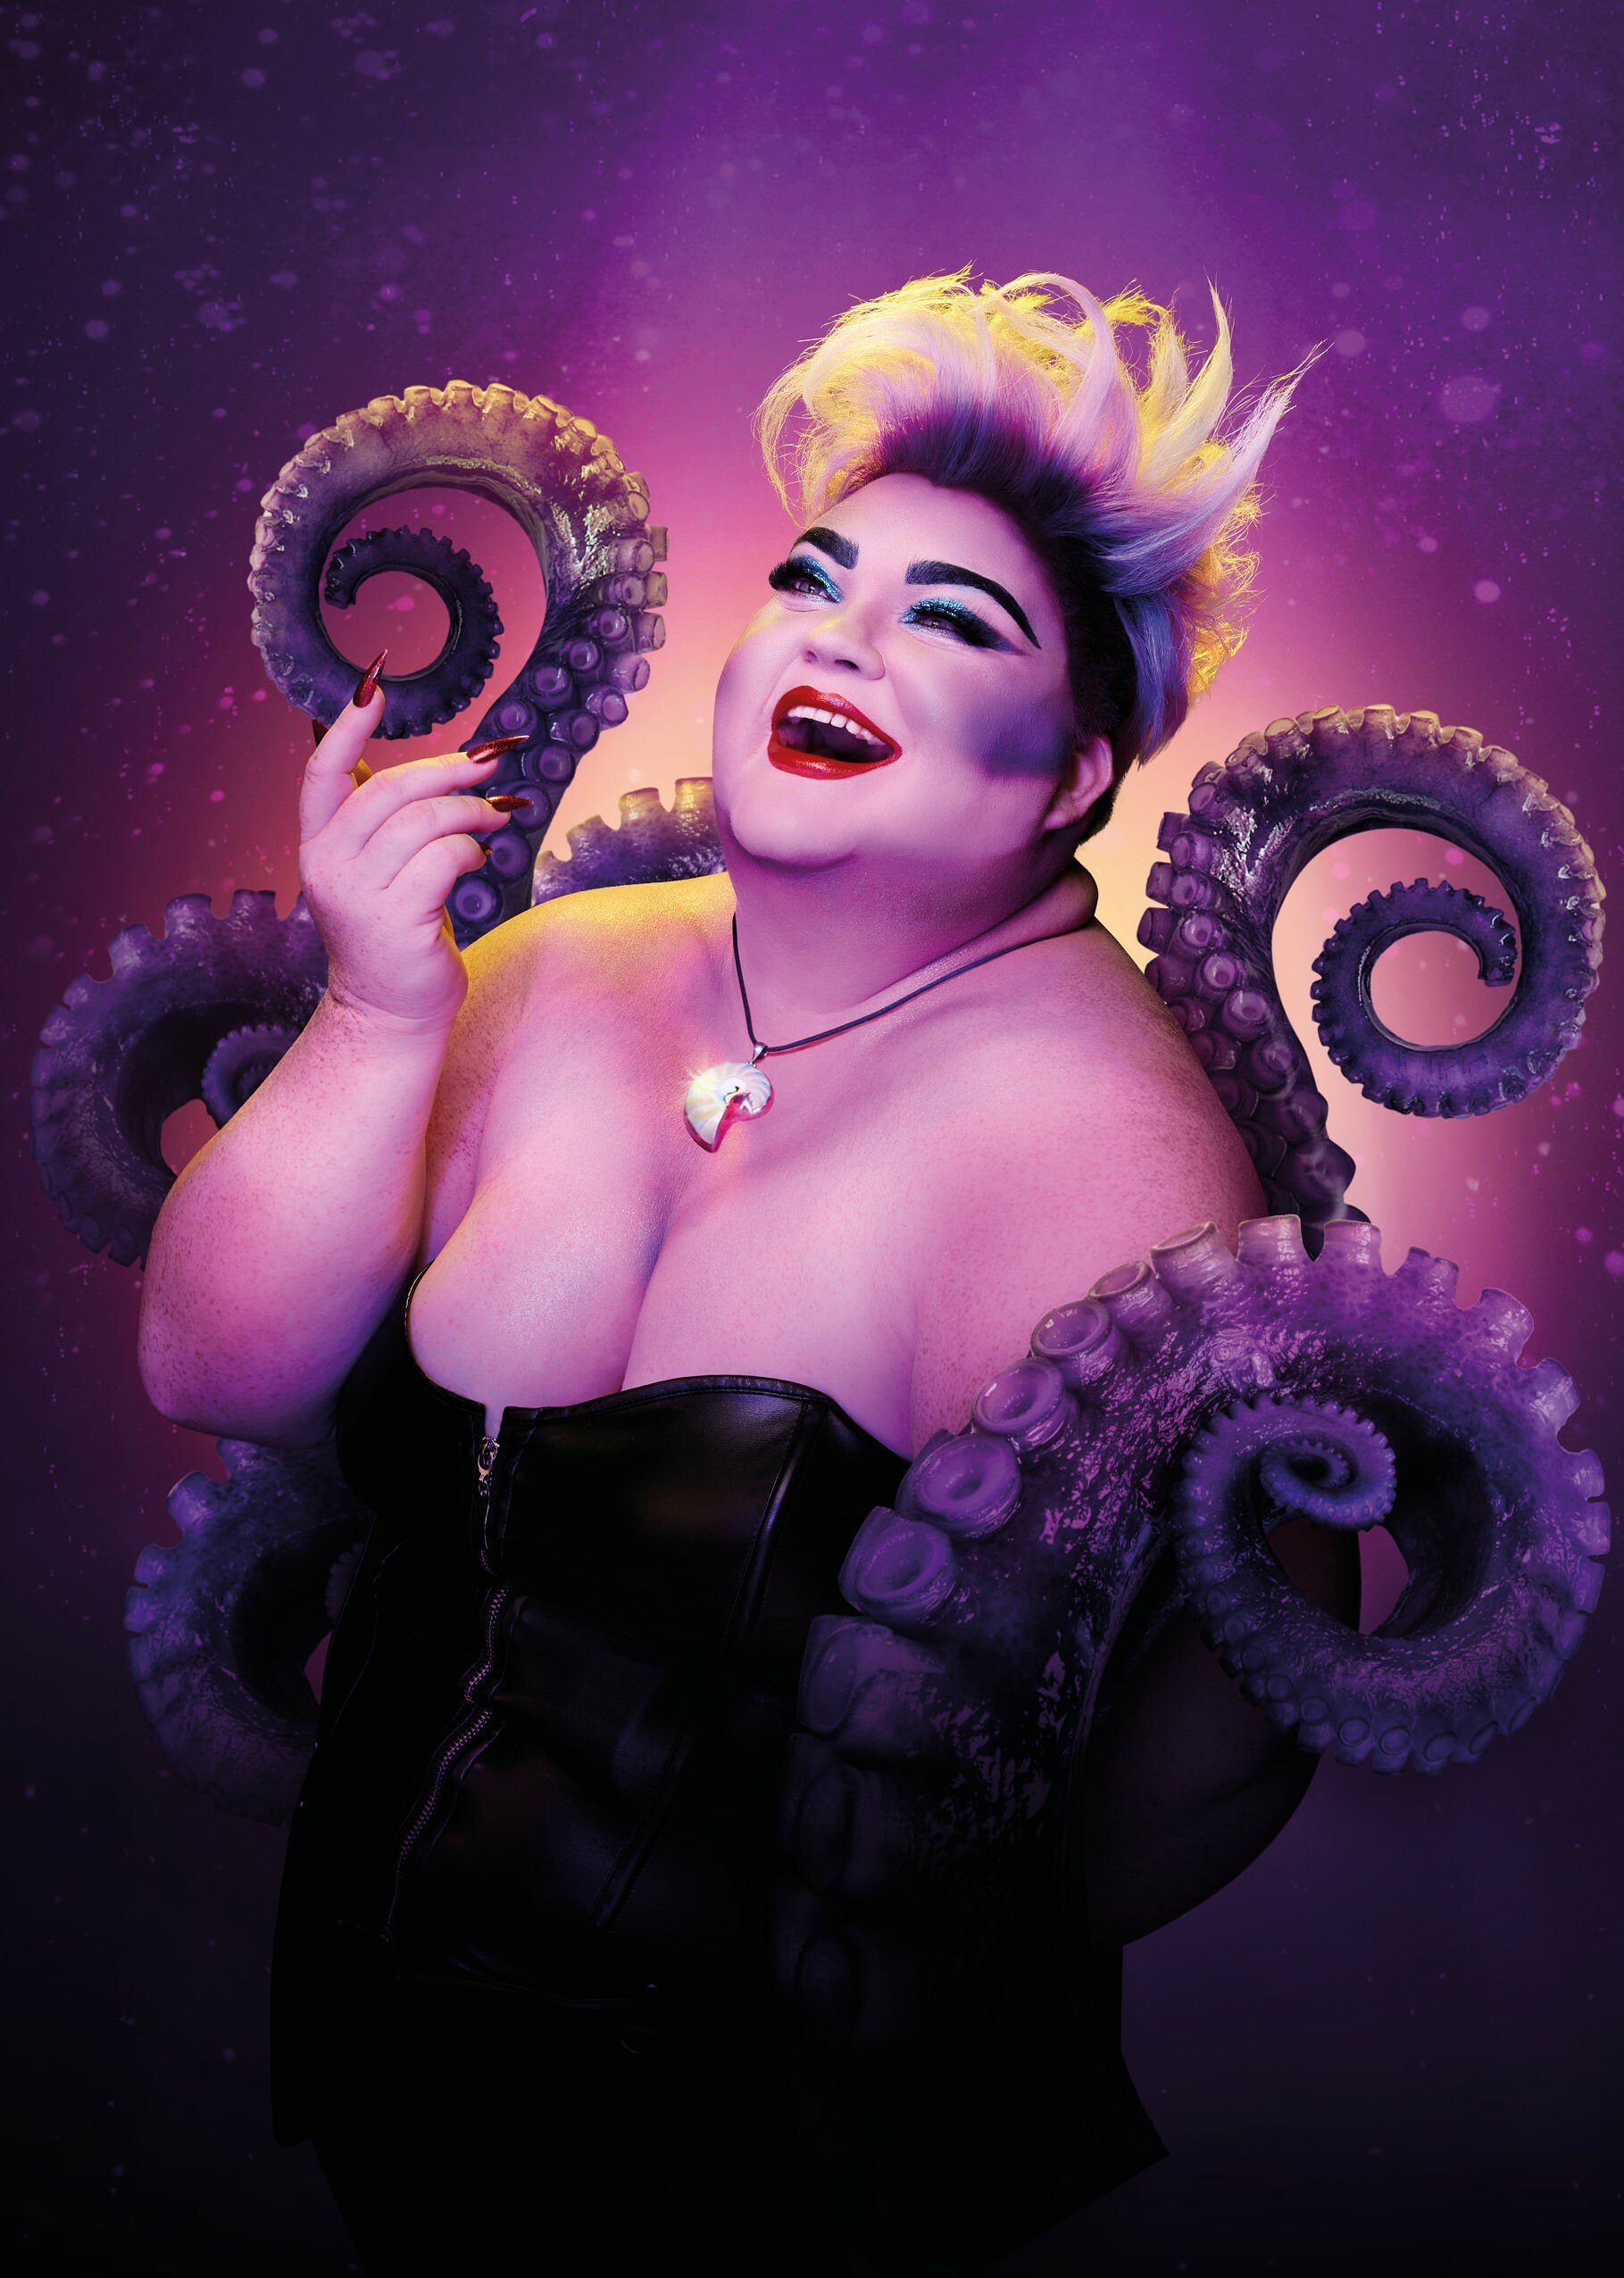 An illustration of Ursula with four tentacles surrounding her. She holds one hand up and smiles with her mouth open.